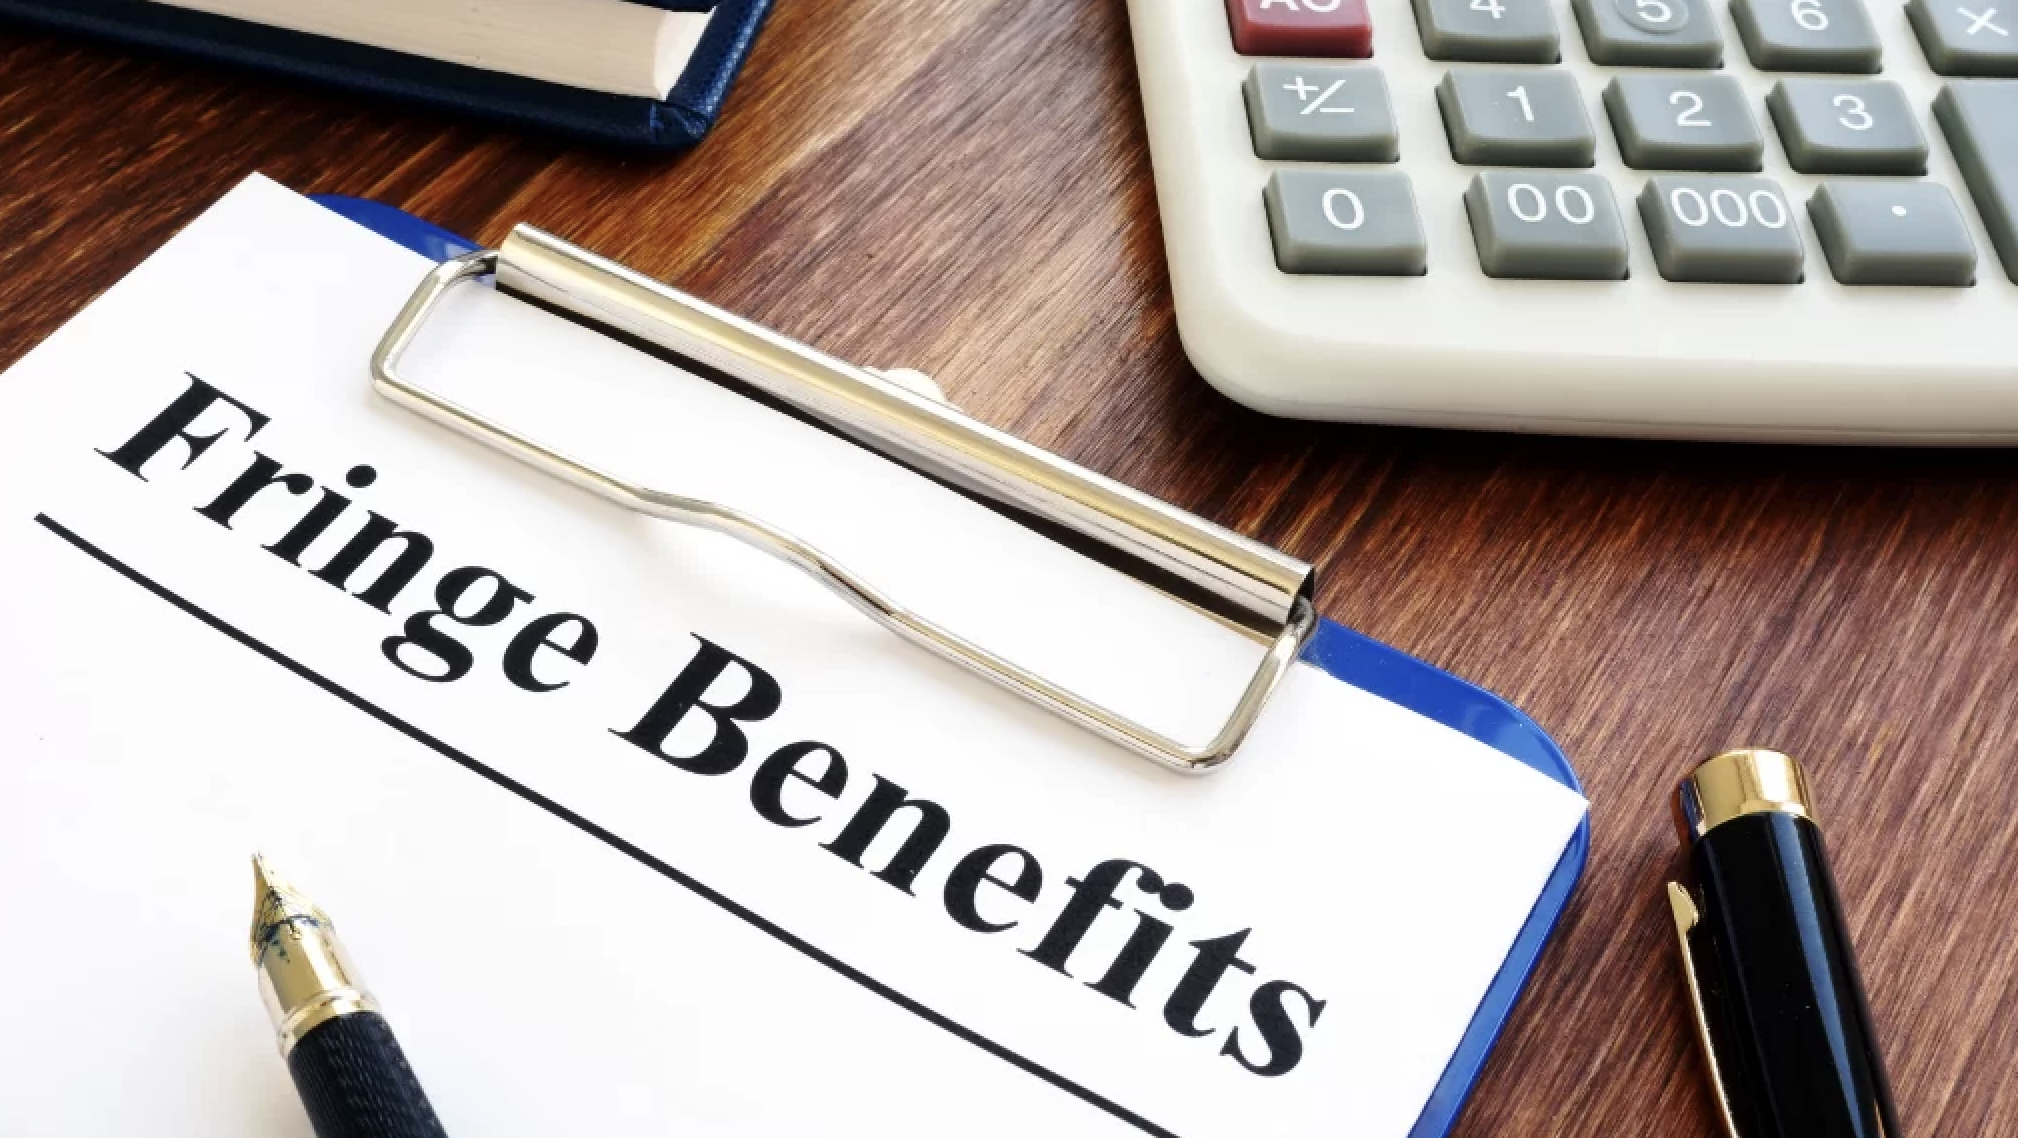 Do you operate a business and offer 'fringe benefits' to your employees